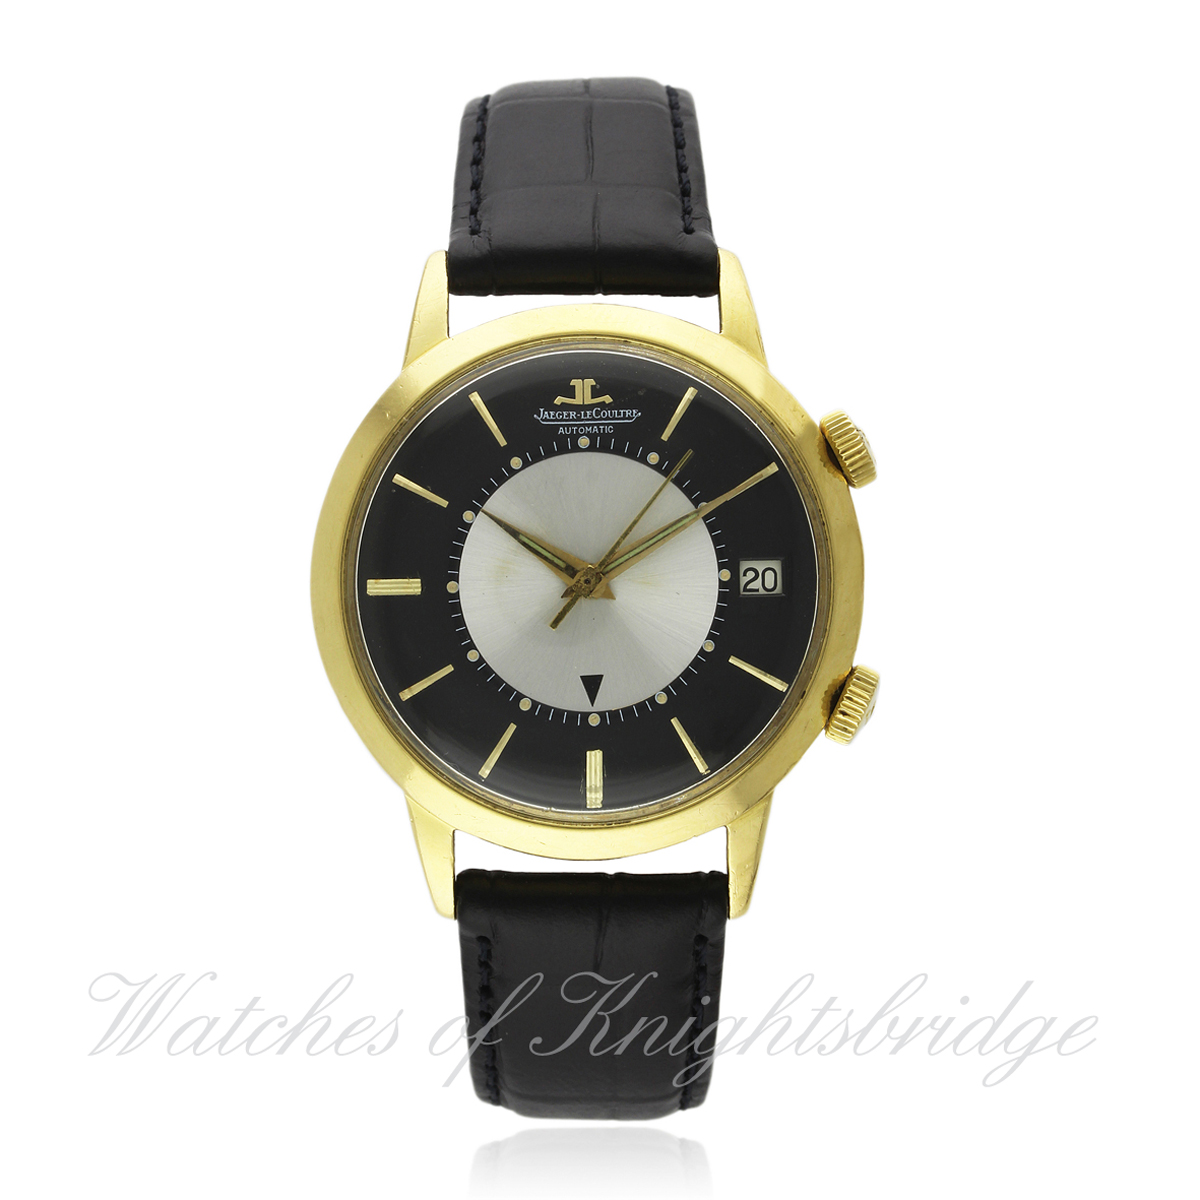 A RARE GENTLEMAN`S 18K SOLID GOLD JAEGER LECOULTRE MEMOVOX AUTOMATIC ALARM WRIST WATCH CIRCA 1960s